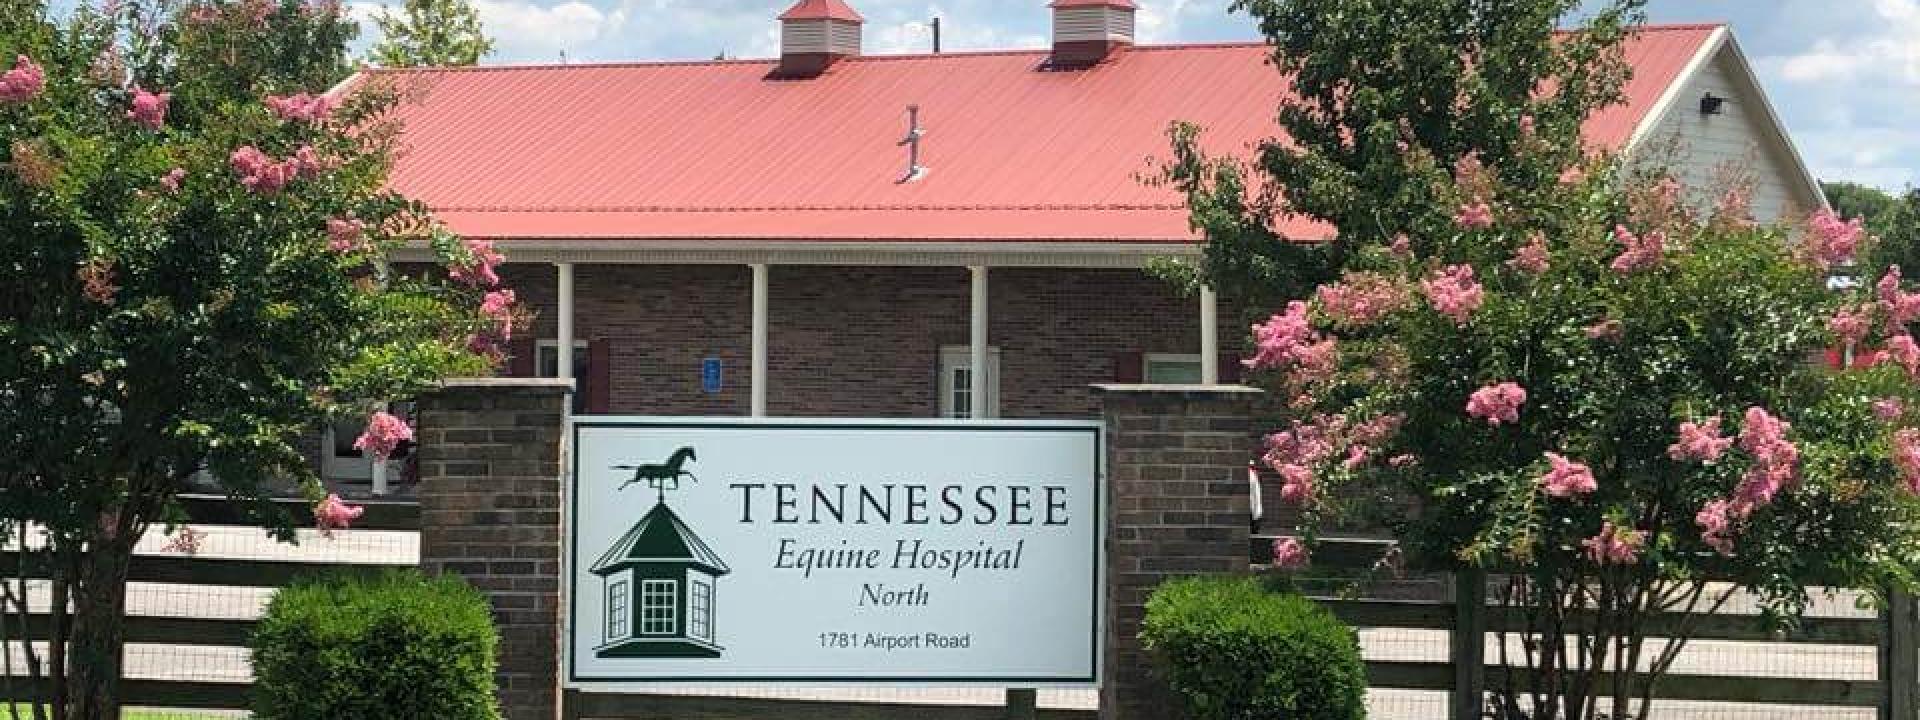 Tennessee Equine Hospital North